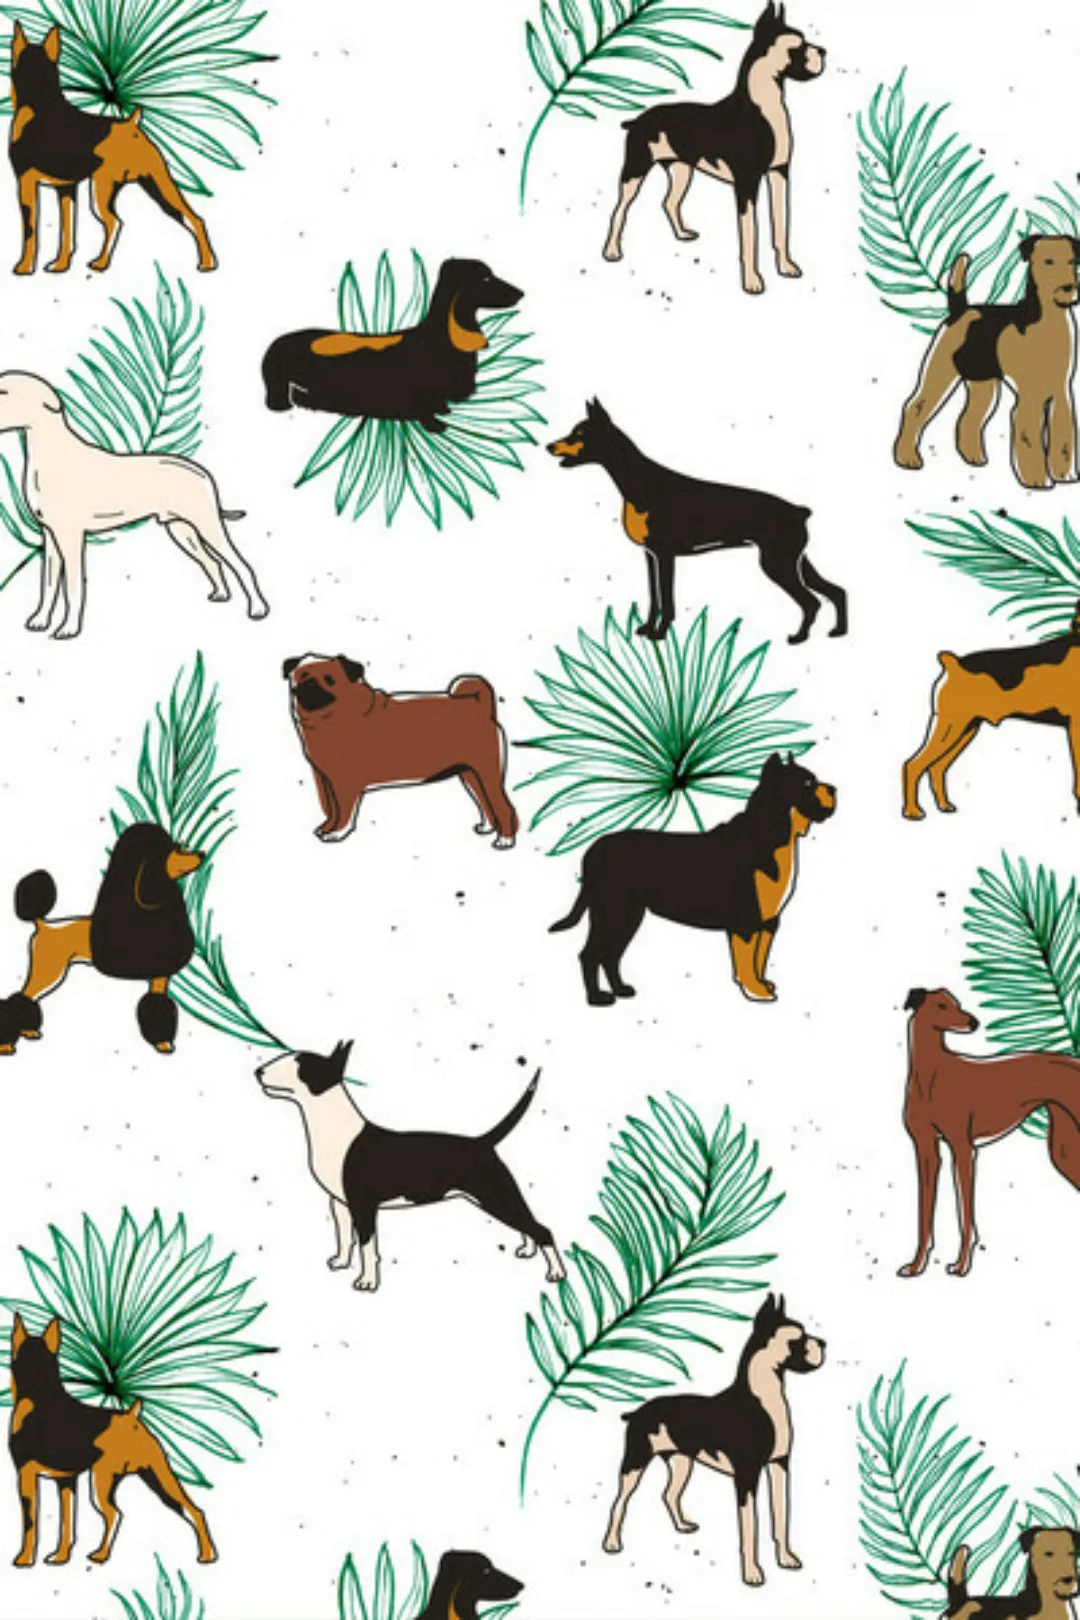 Poster / Leinwandbild - Miracles With Paws, Tropical Cute Quirky Dog Pets I günstig online kaufen